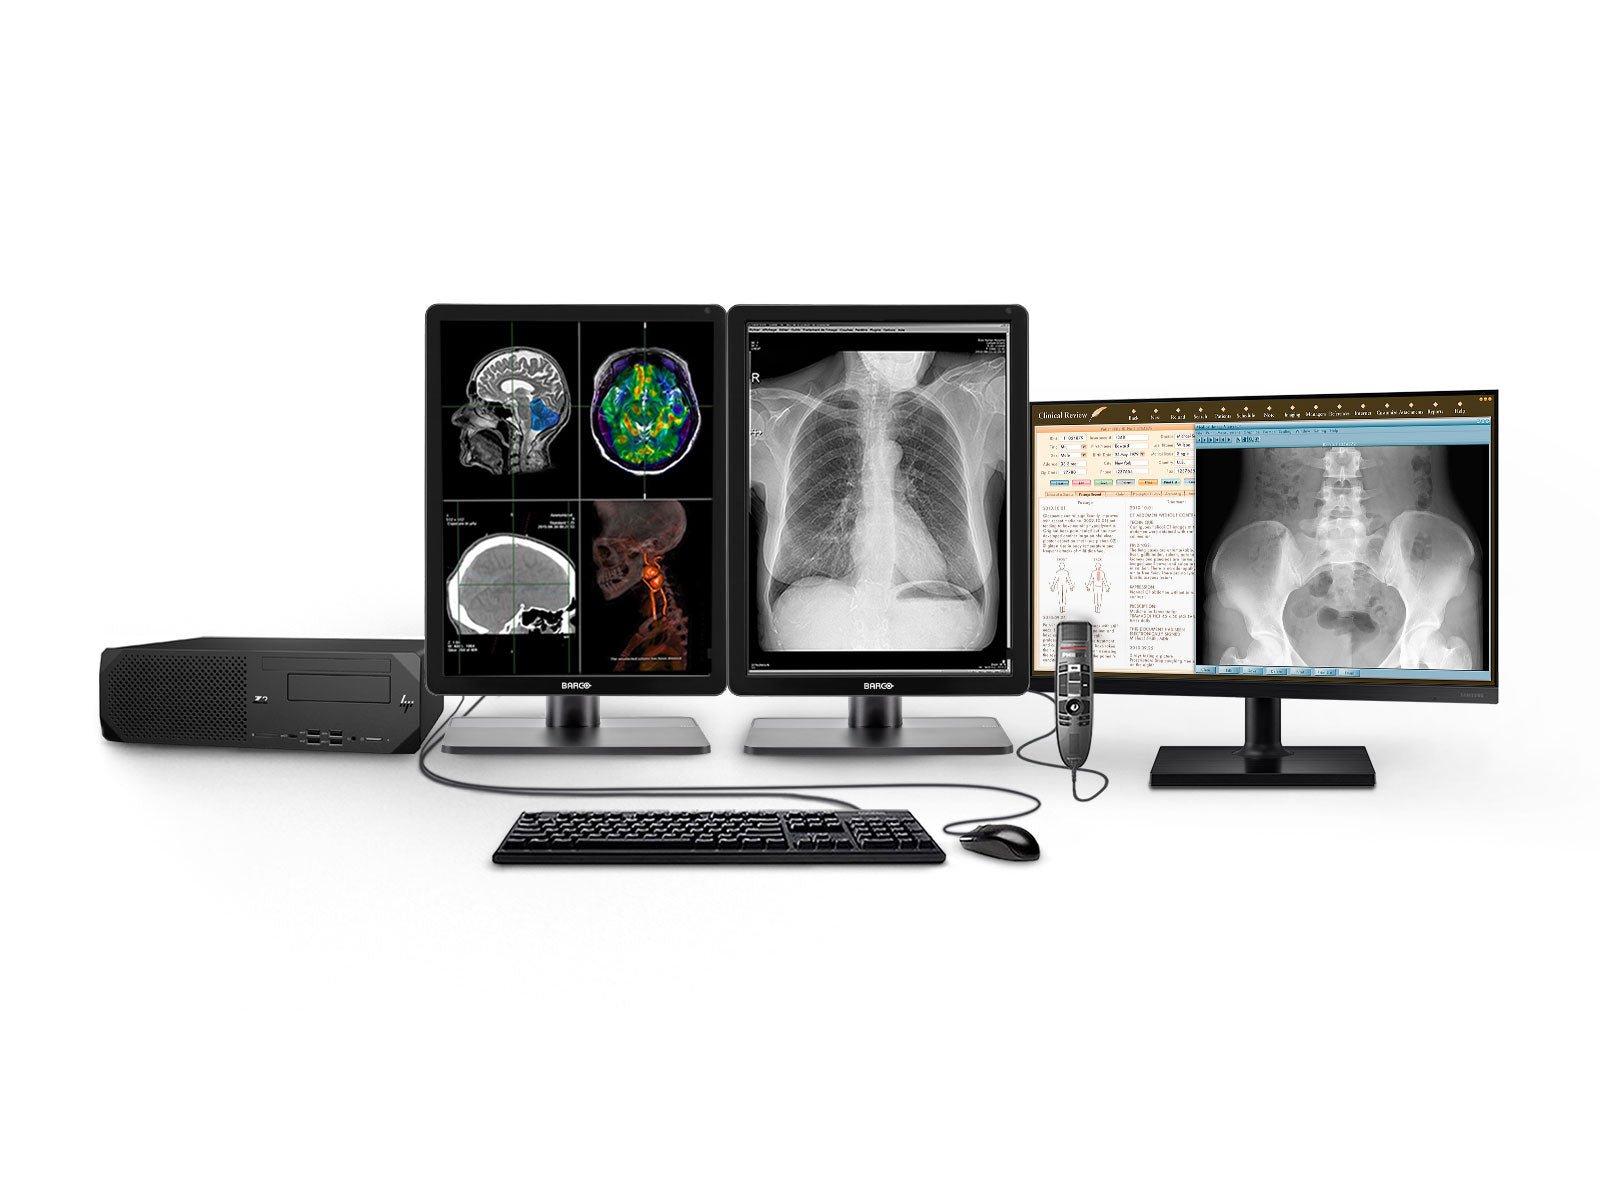 Complete PACS General Radiology Station | Barco Nio 2MP Color LED Display | HP Workstation | Dictation Mic | Worklist Monitor (2221Z2N) Monitors.com 